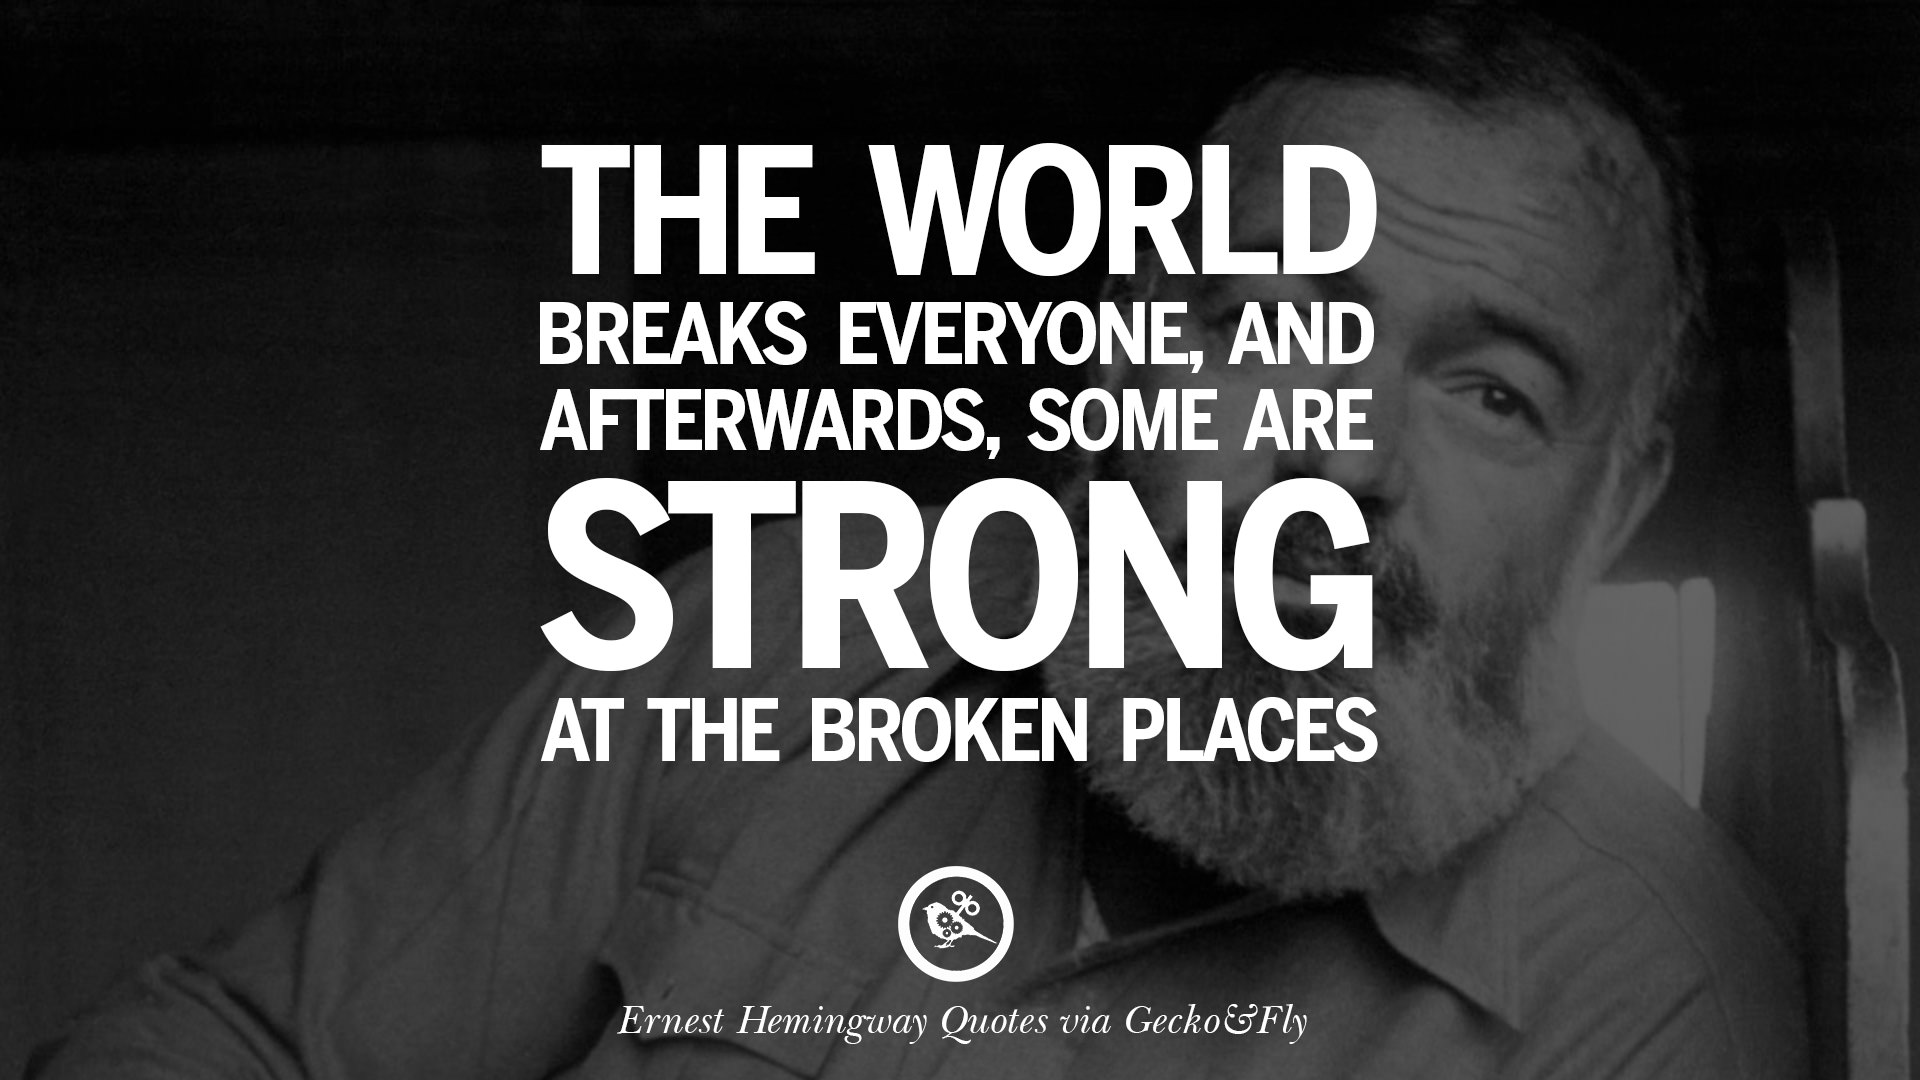 The world breaks everyone and afterwards some are strong at the broken places